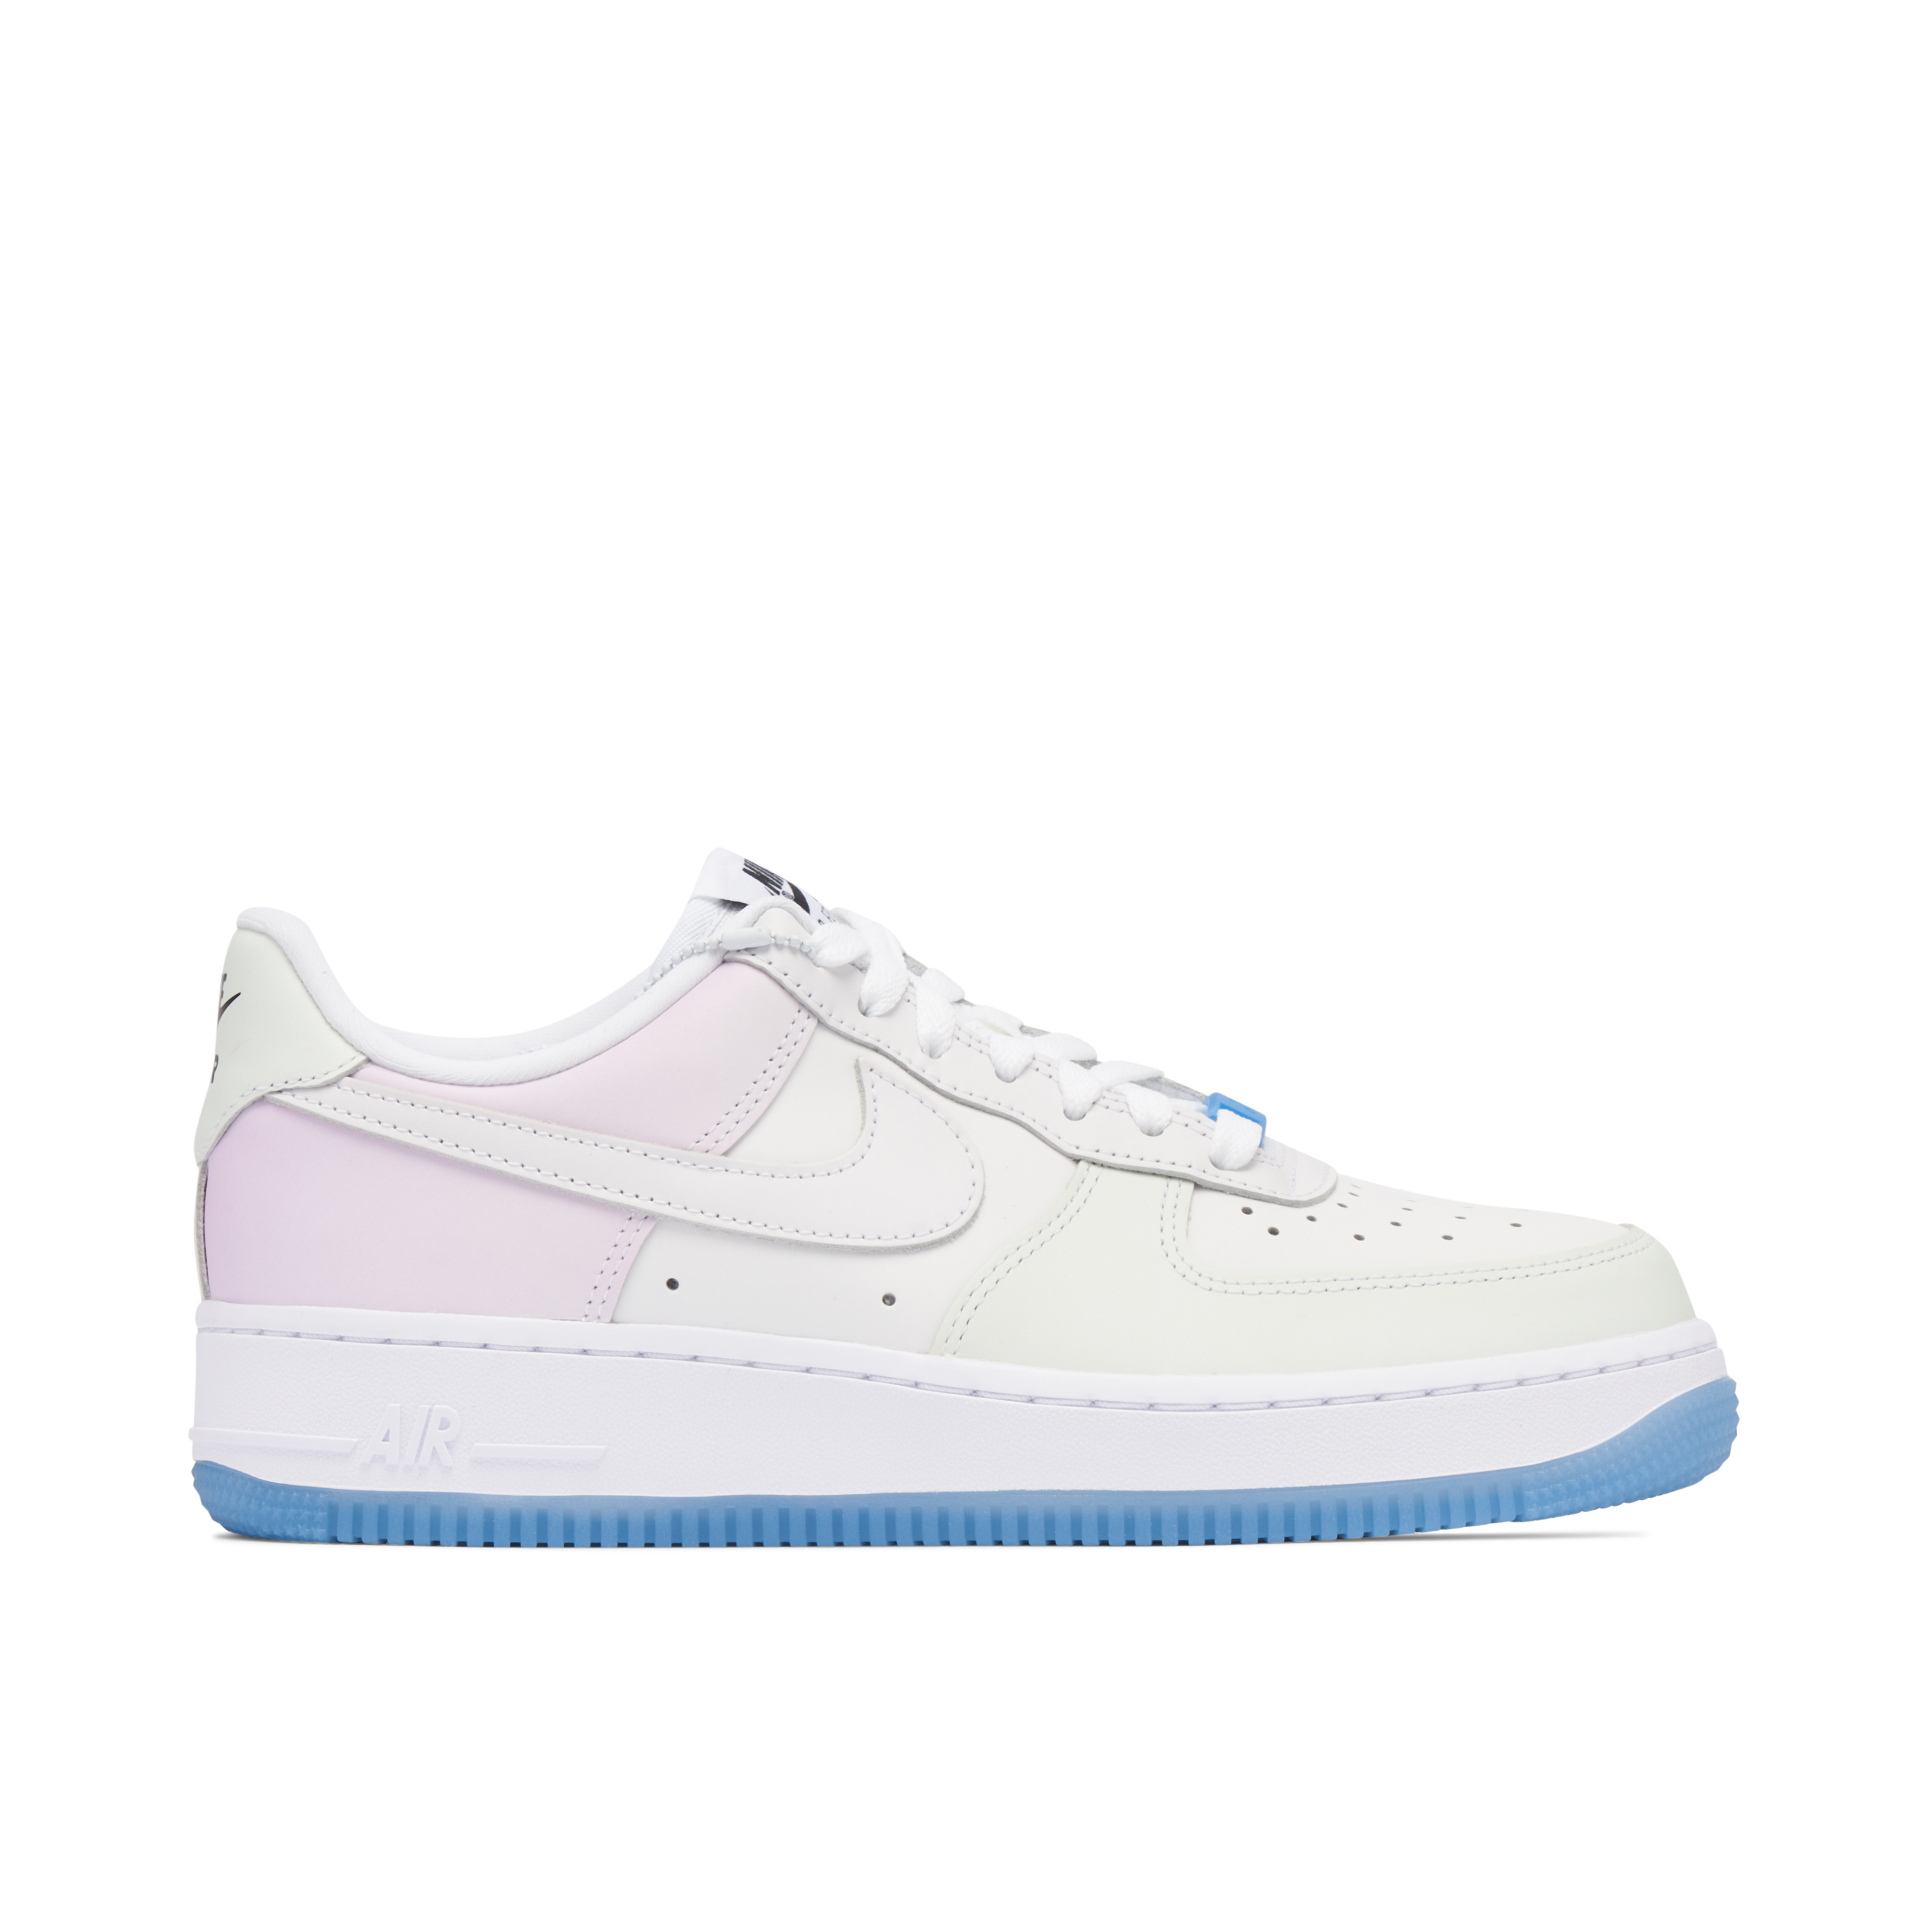 Nike WMNS Air Force Low UV "White"